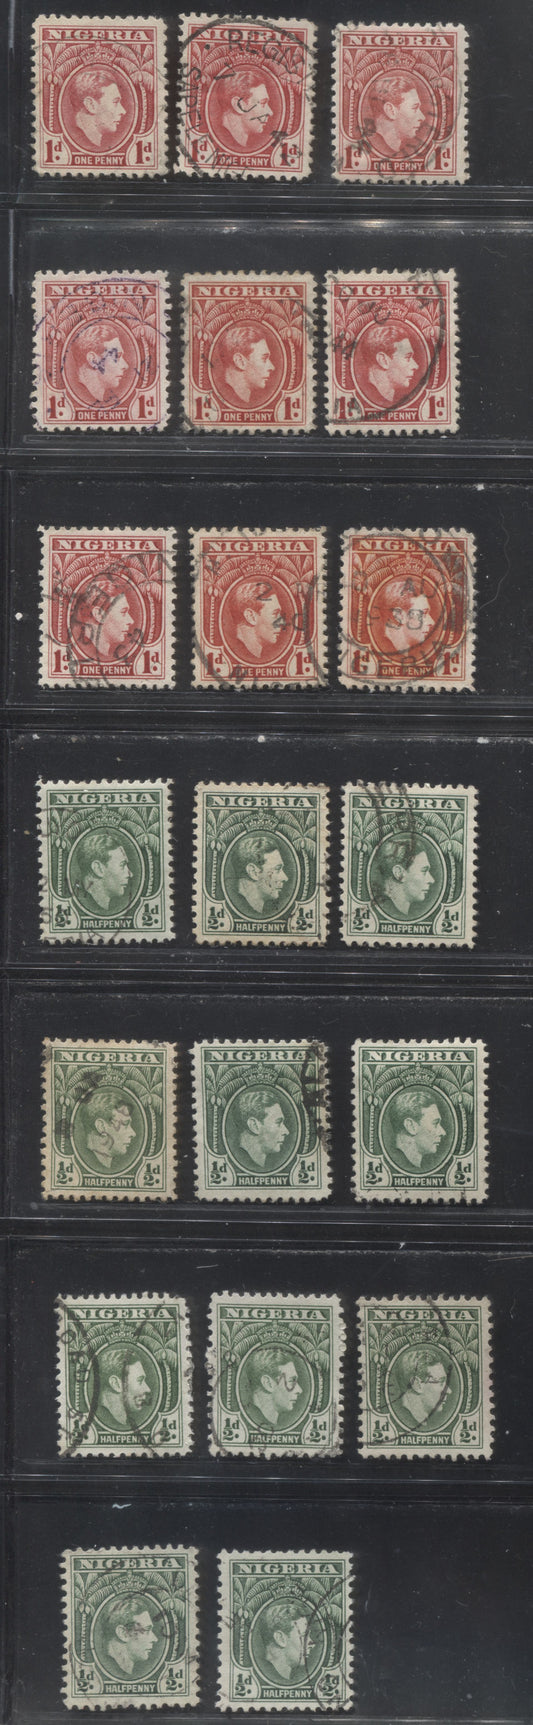 Nigeria SG#49-50a 1/2d Green, 1d Carmine & Rose Red King George VI, 1938-1952 King George VI "Palm Tree" Definitive Issue, a Specialized Group of 20 Different Printings, Generally VF Used